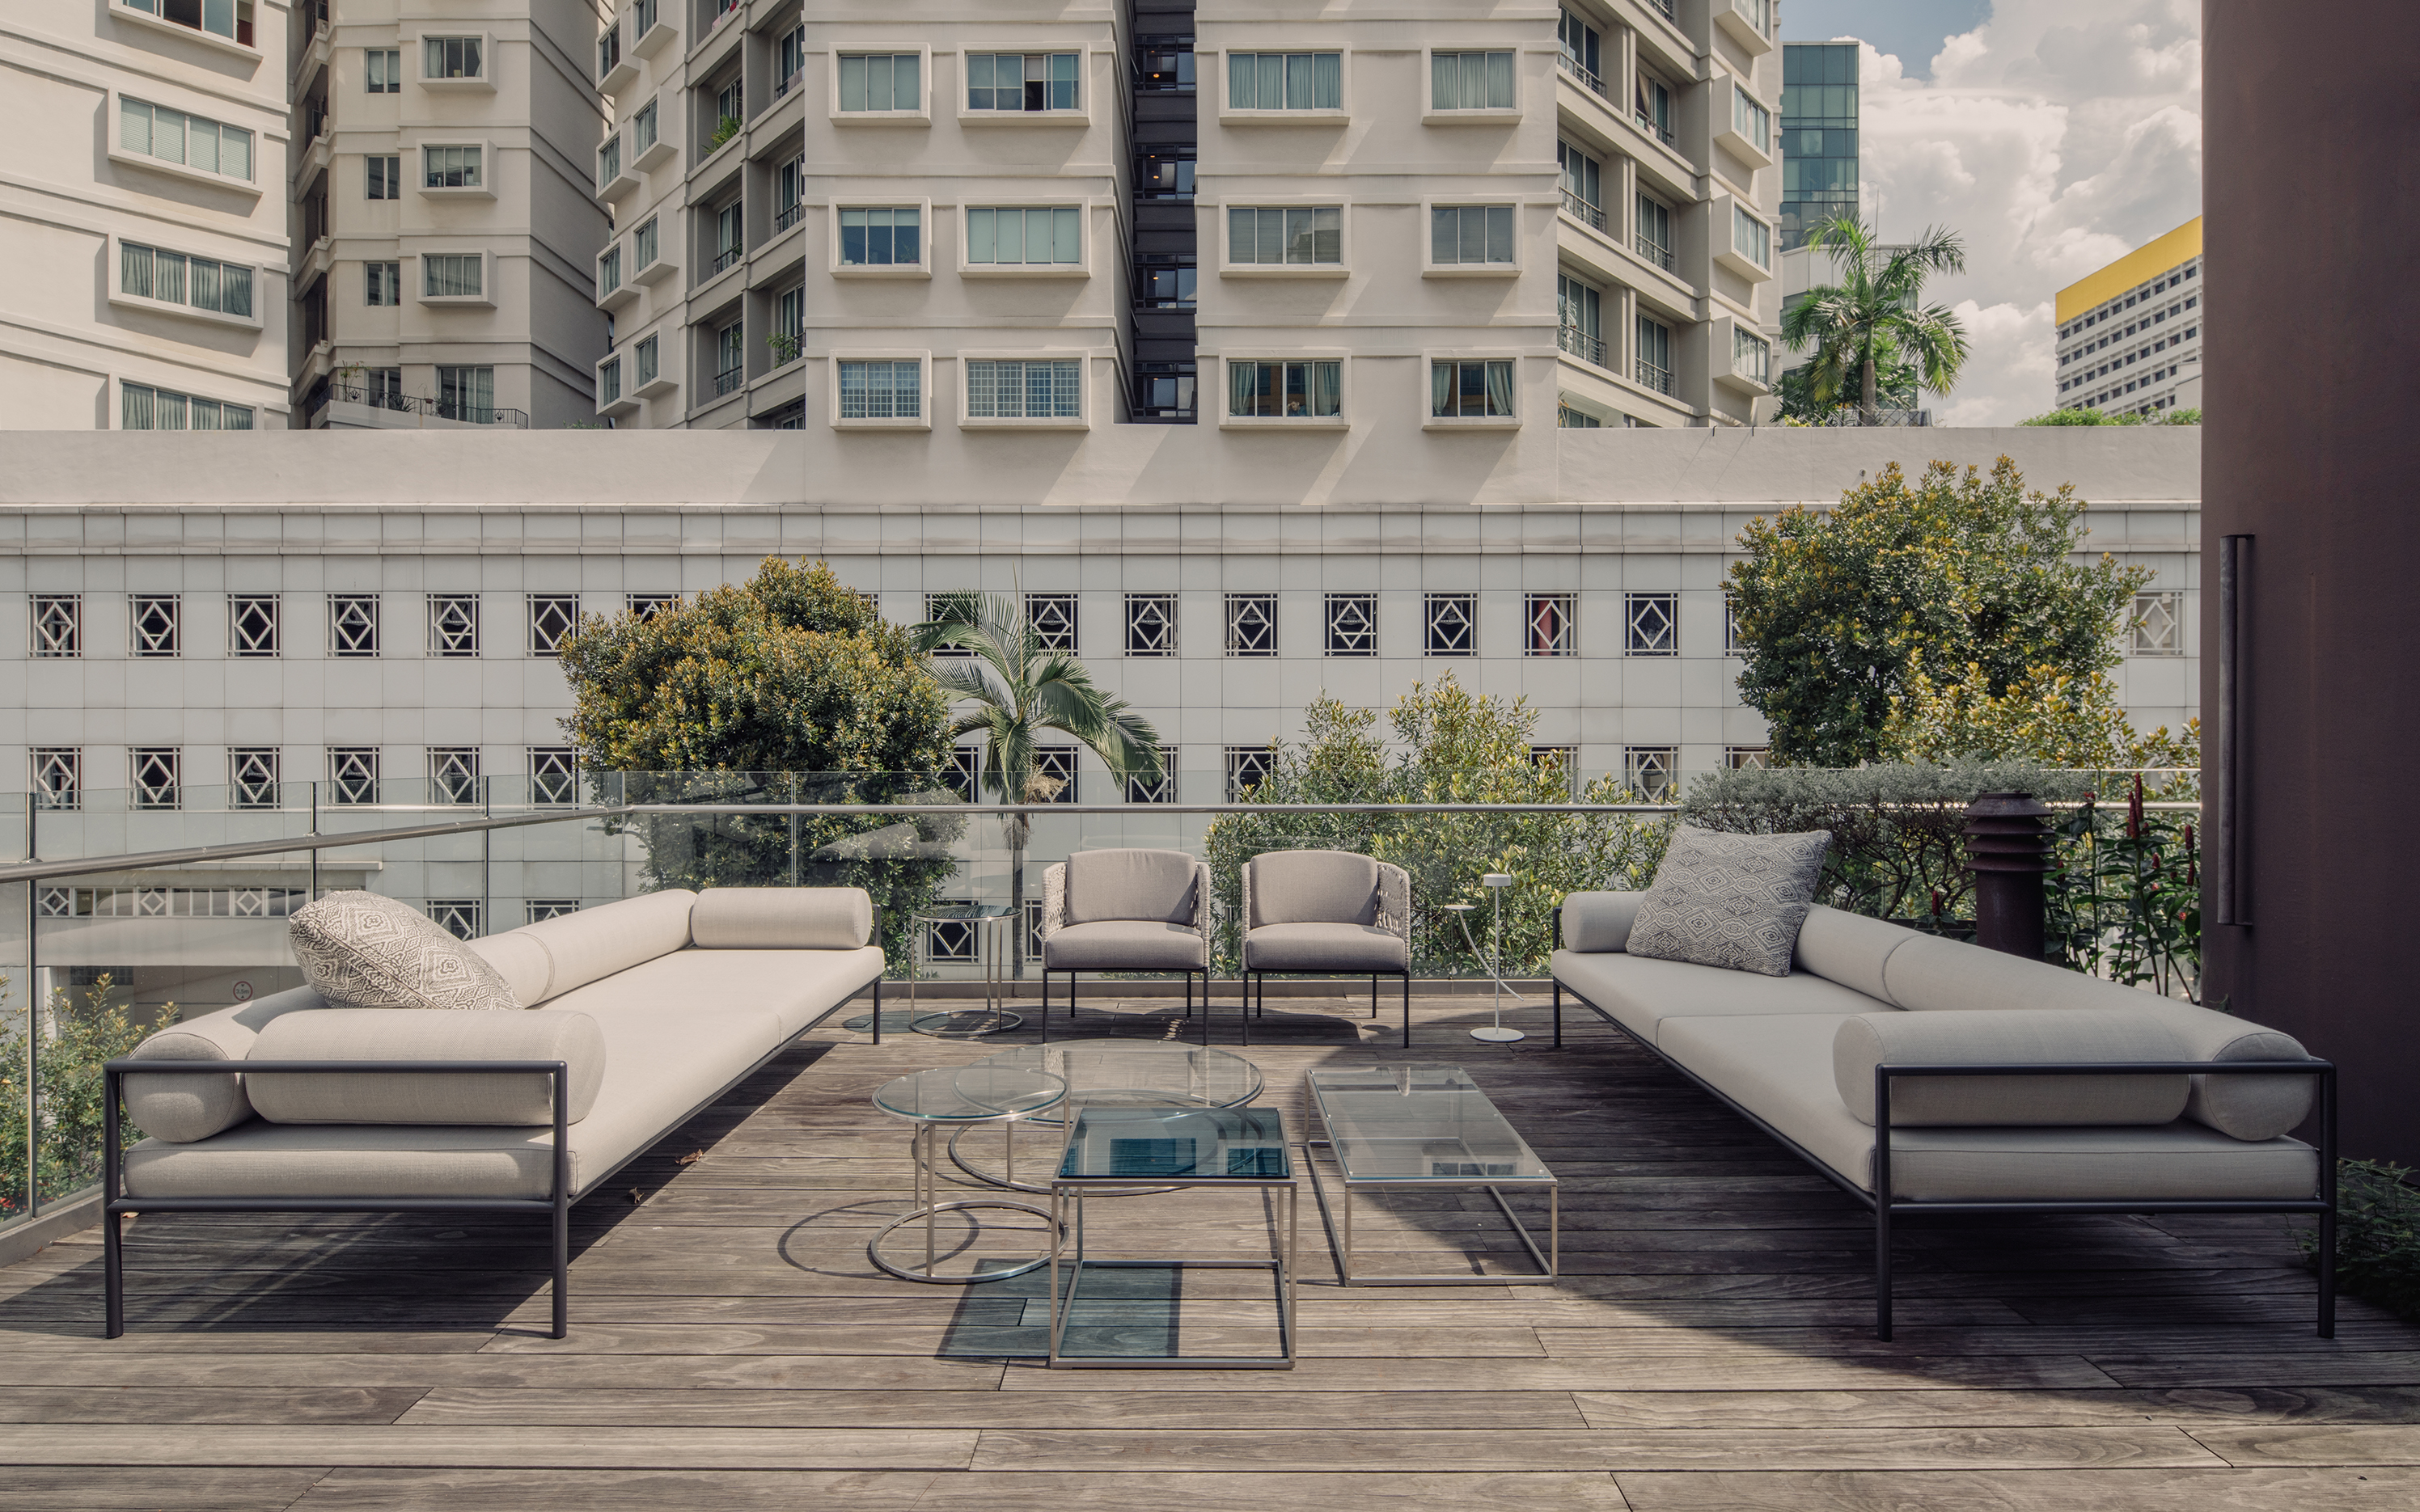 Agra outdoor sofa collection by David Lopez Quincoces, the Ile table collection by Piero Lissoni and the Poncho armchairs by Lucidi Pevere for Living Divani. Image © Khoo Guo Jie, Khoogj.